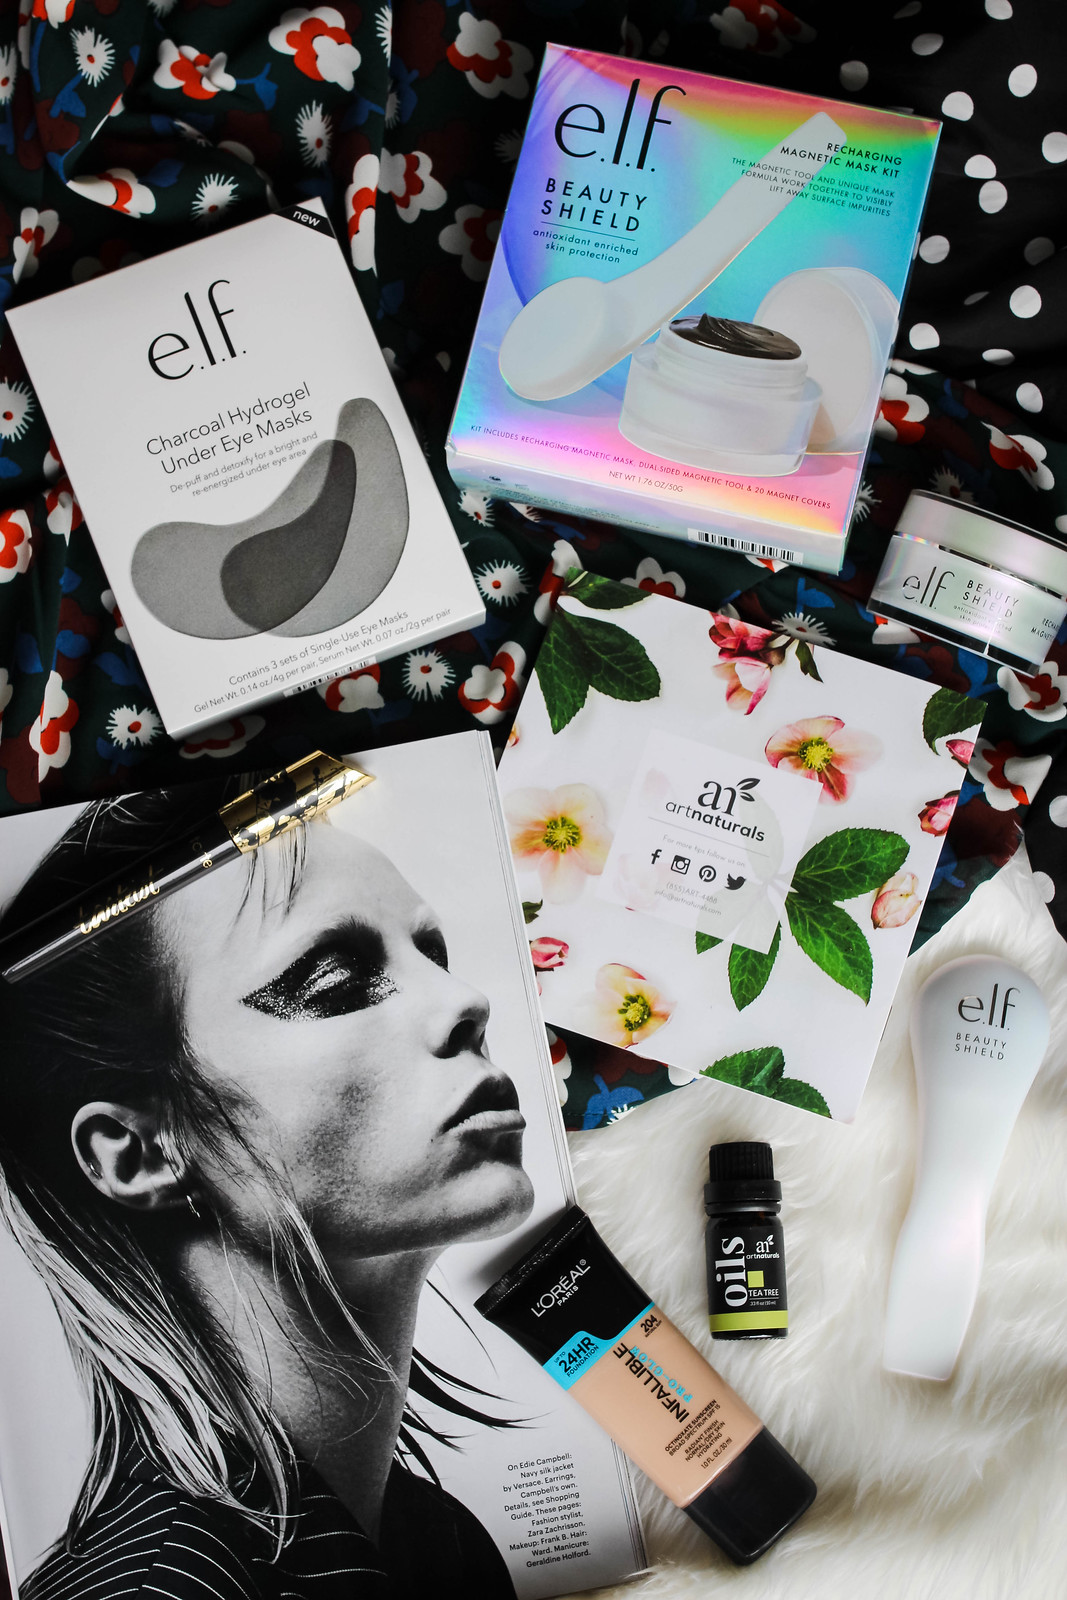 My 5 Favorite New Beauty Products I Tried This Month